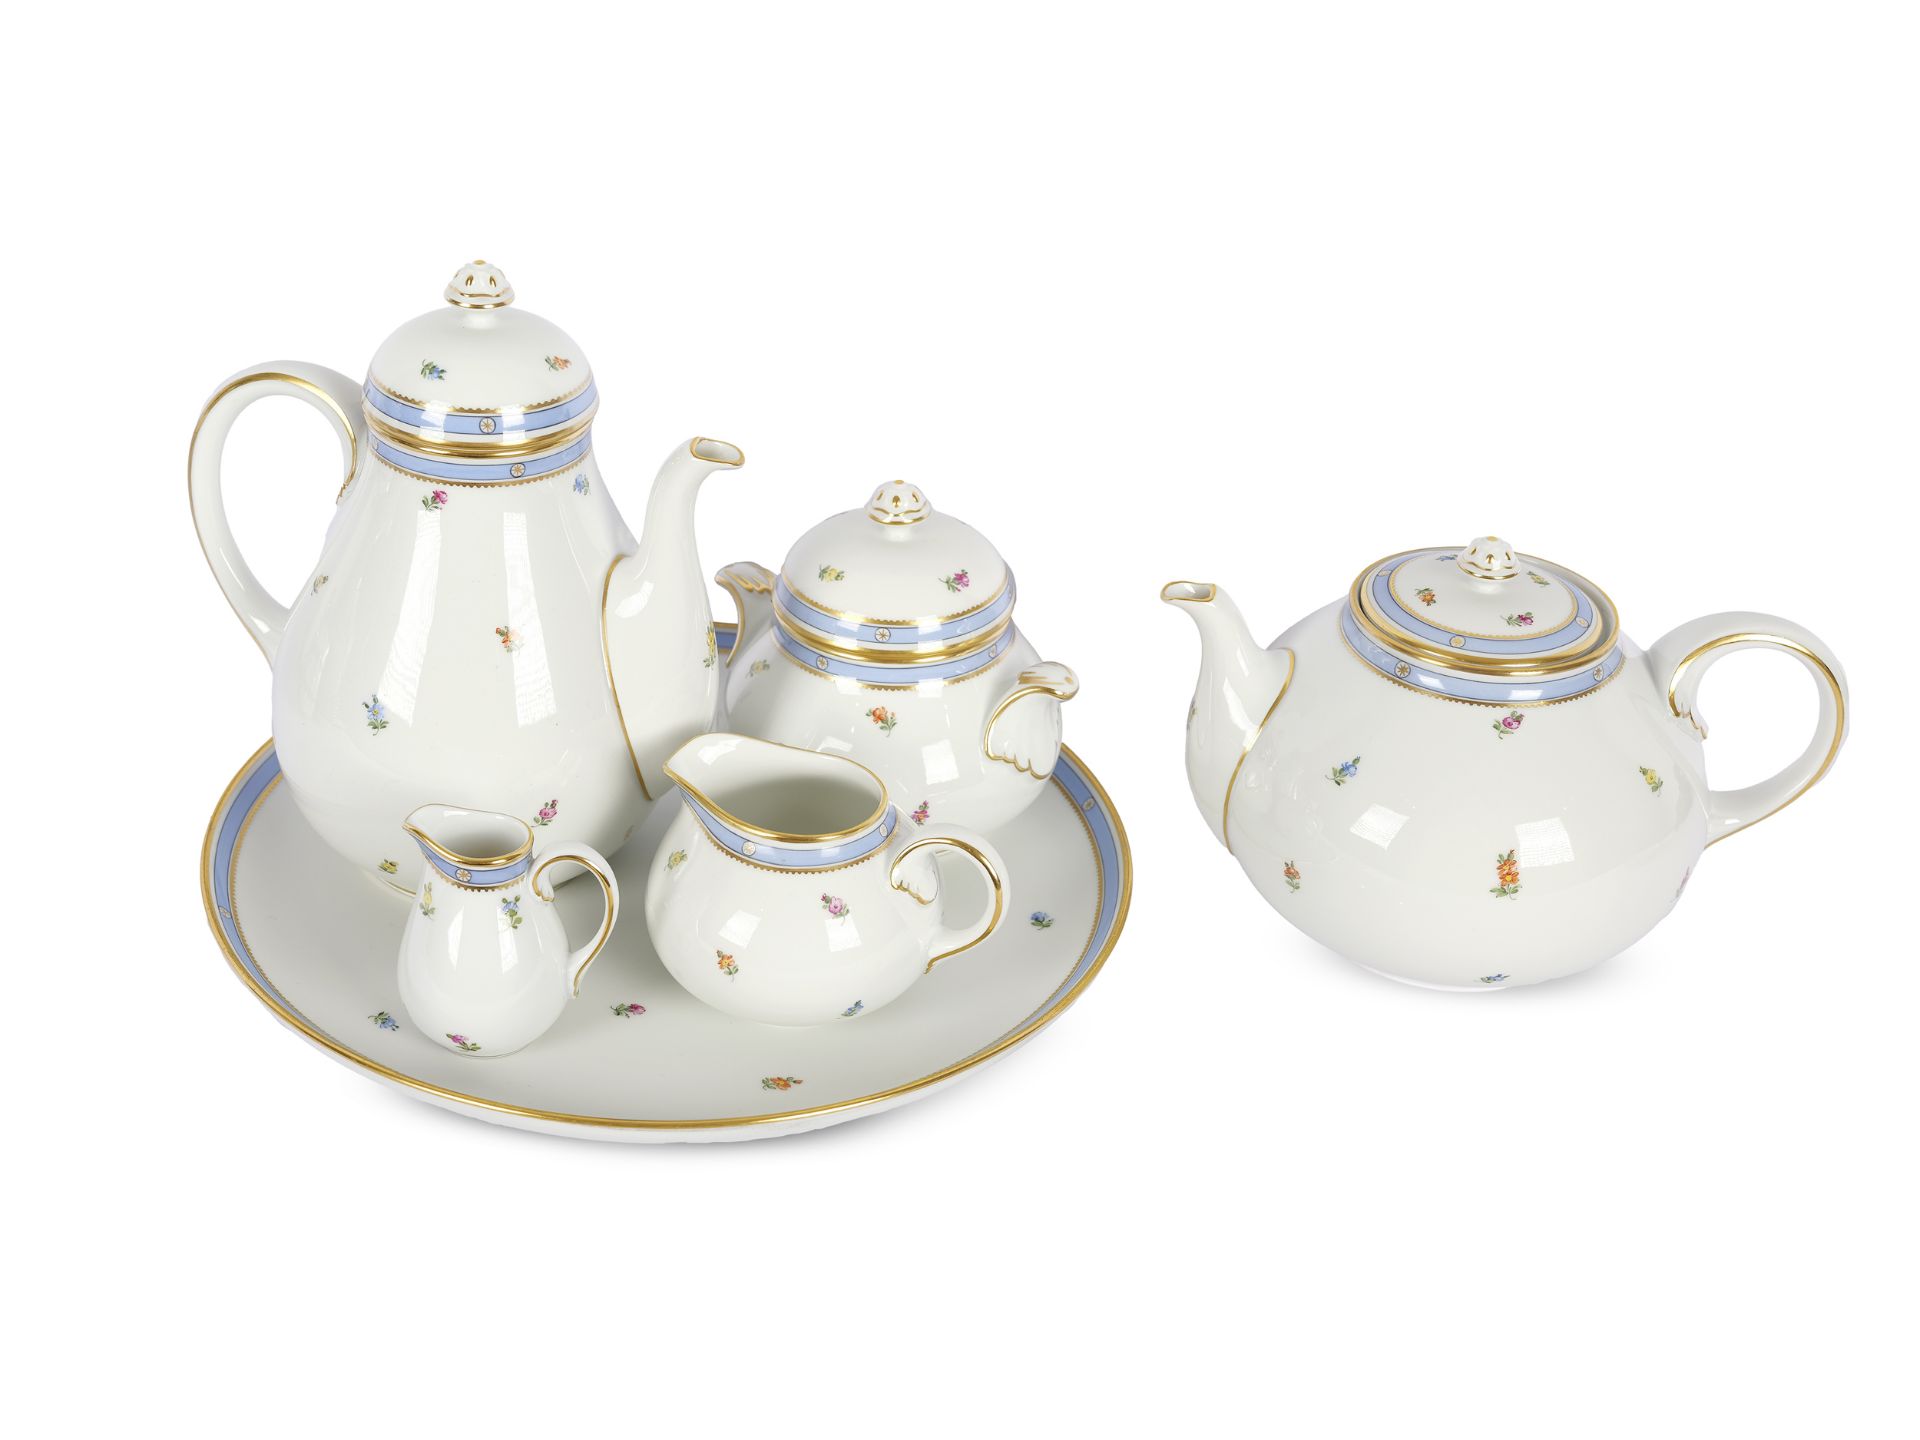 Coffee & tea set with floral decoration, 27 pieces, Augarten Vienna - Image 2 of 6